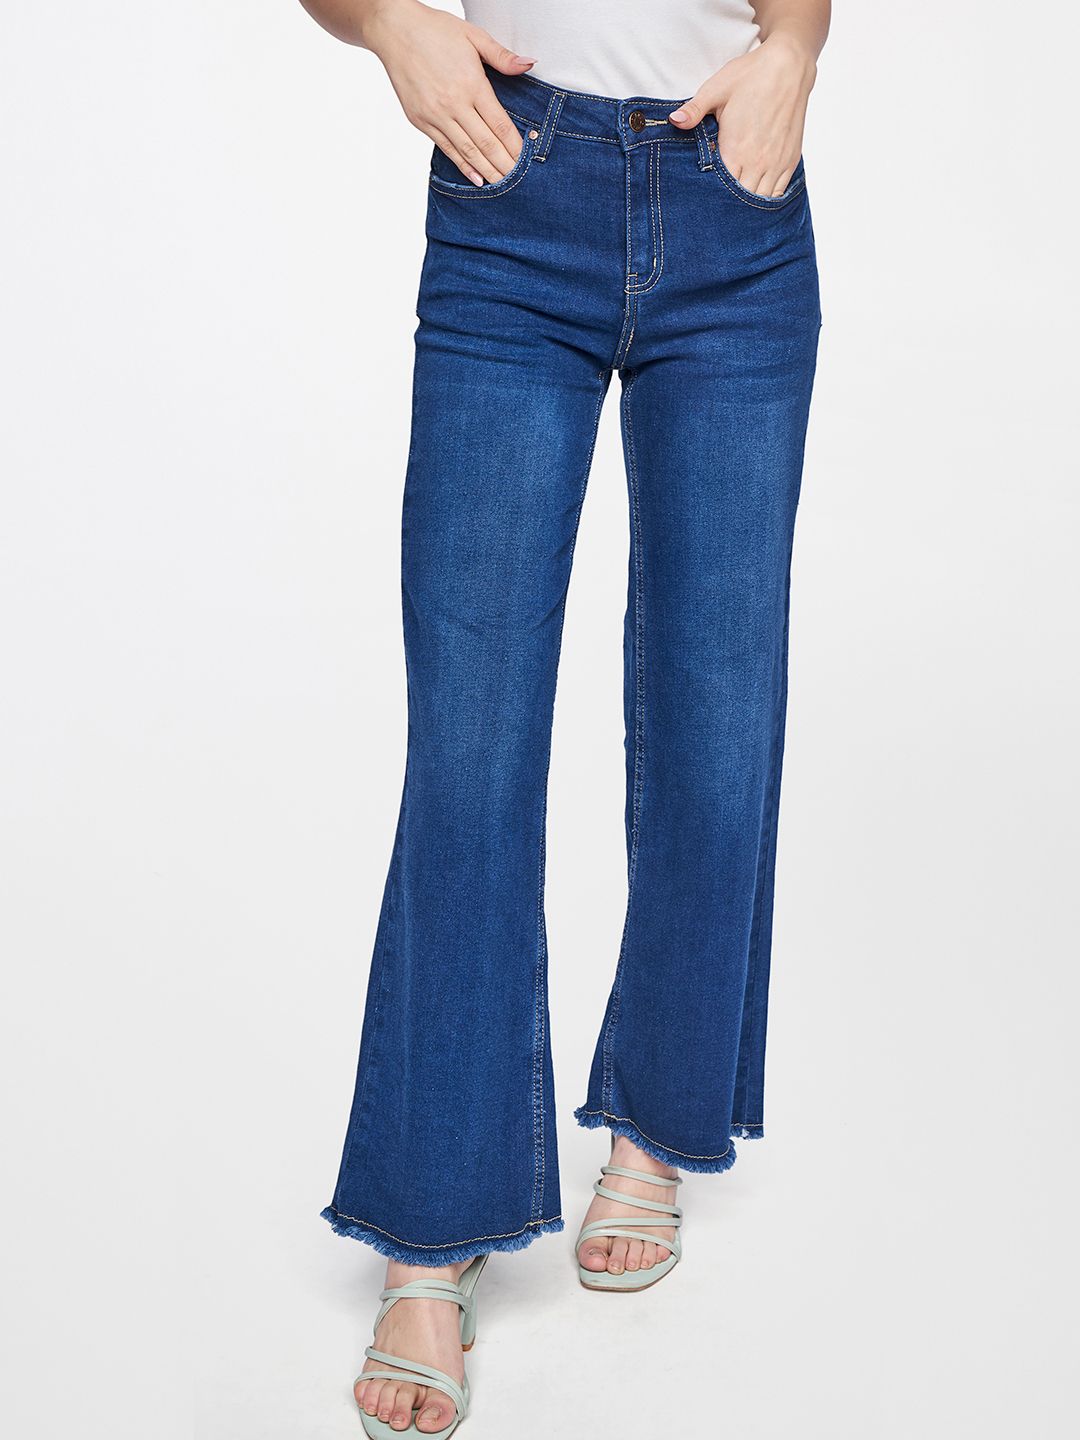 AND Women Blue High-Rise Light Fade Jeans Price in India